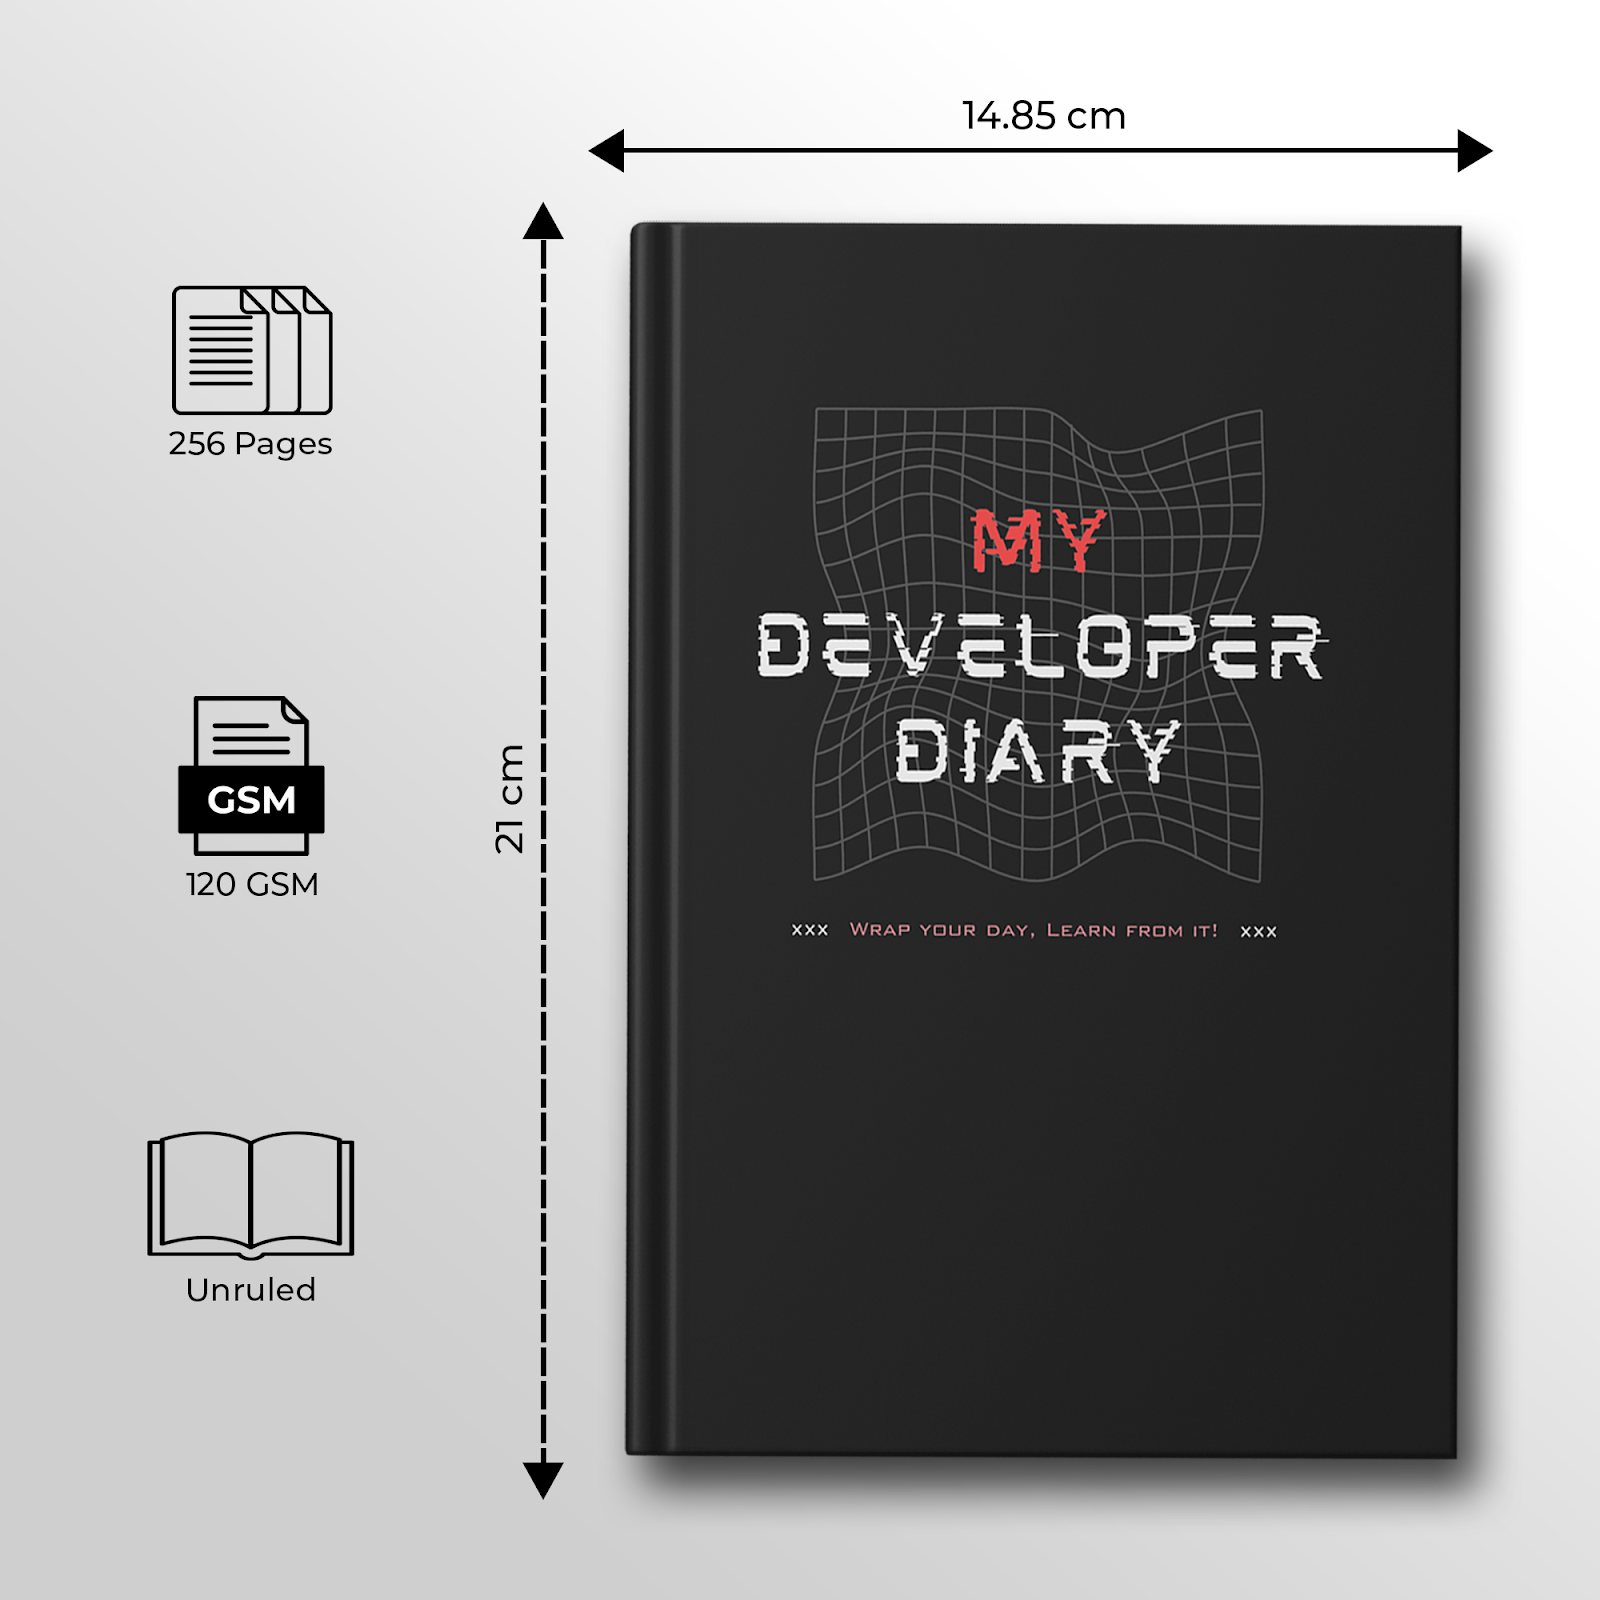 Developer Diary is now available as paper notebook